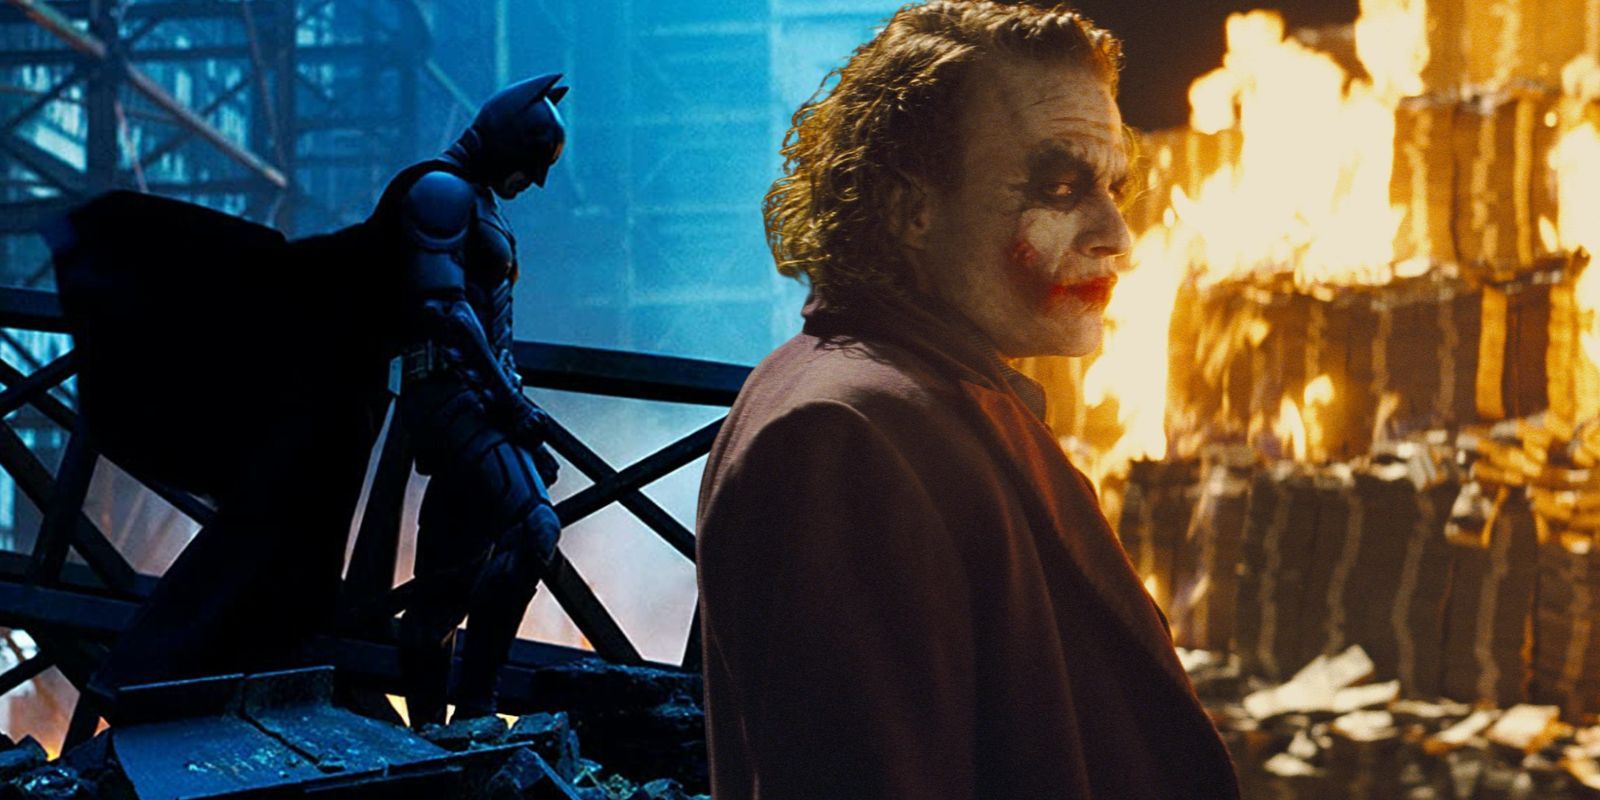 Batman standing in rubble and the Joker burning money in The Dark Knight